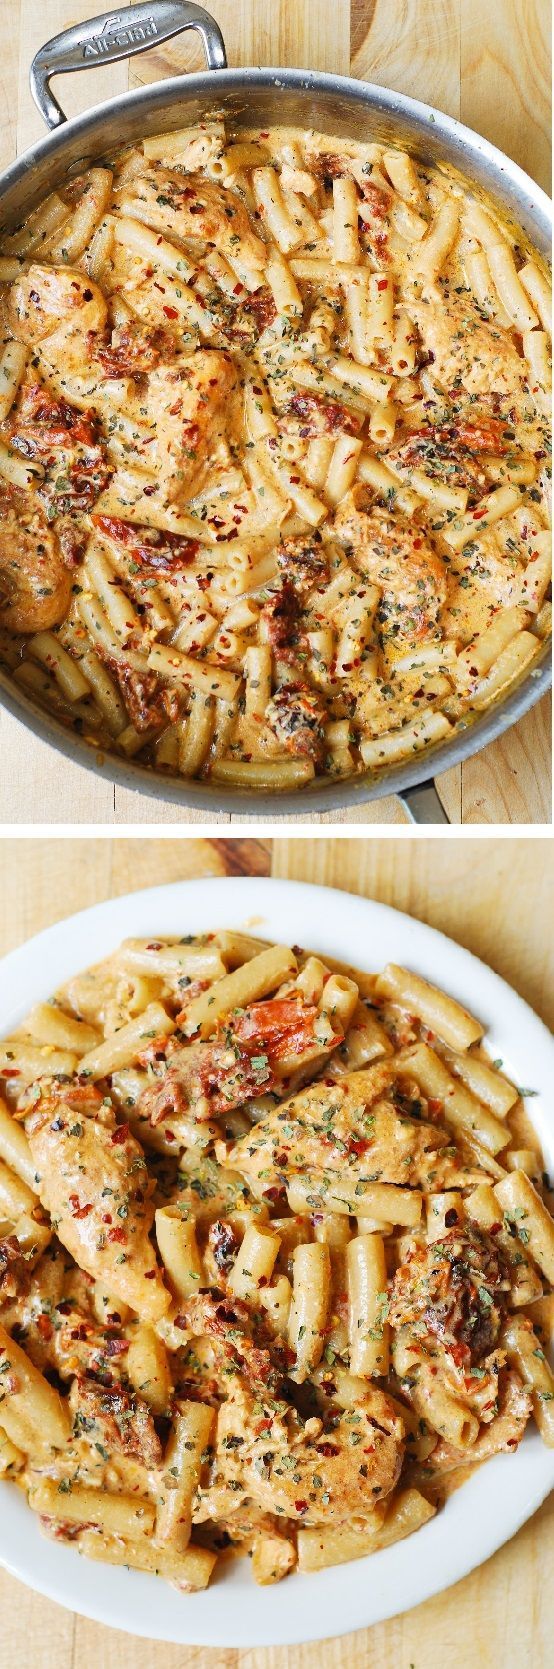 Chicken breast tenderloins sautéed with sun-dried tomatoes and penne pasta in a c